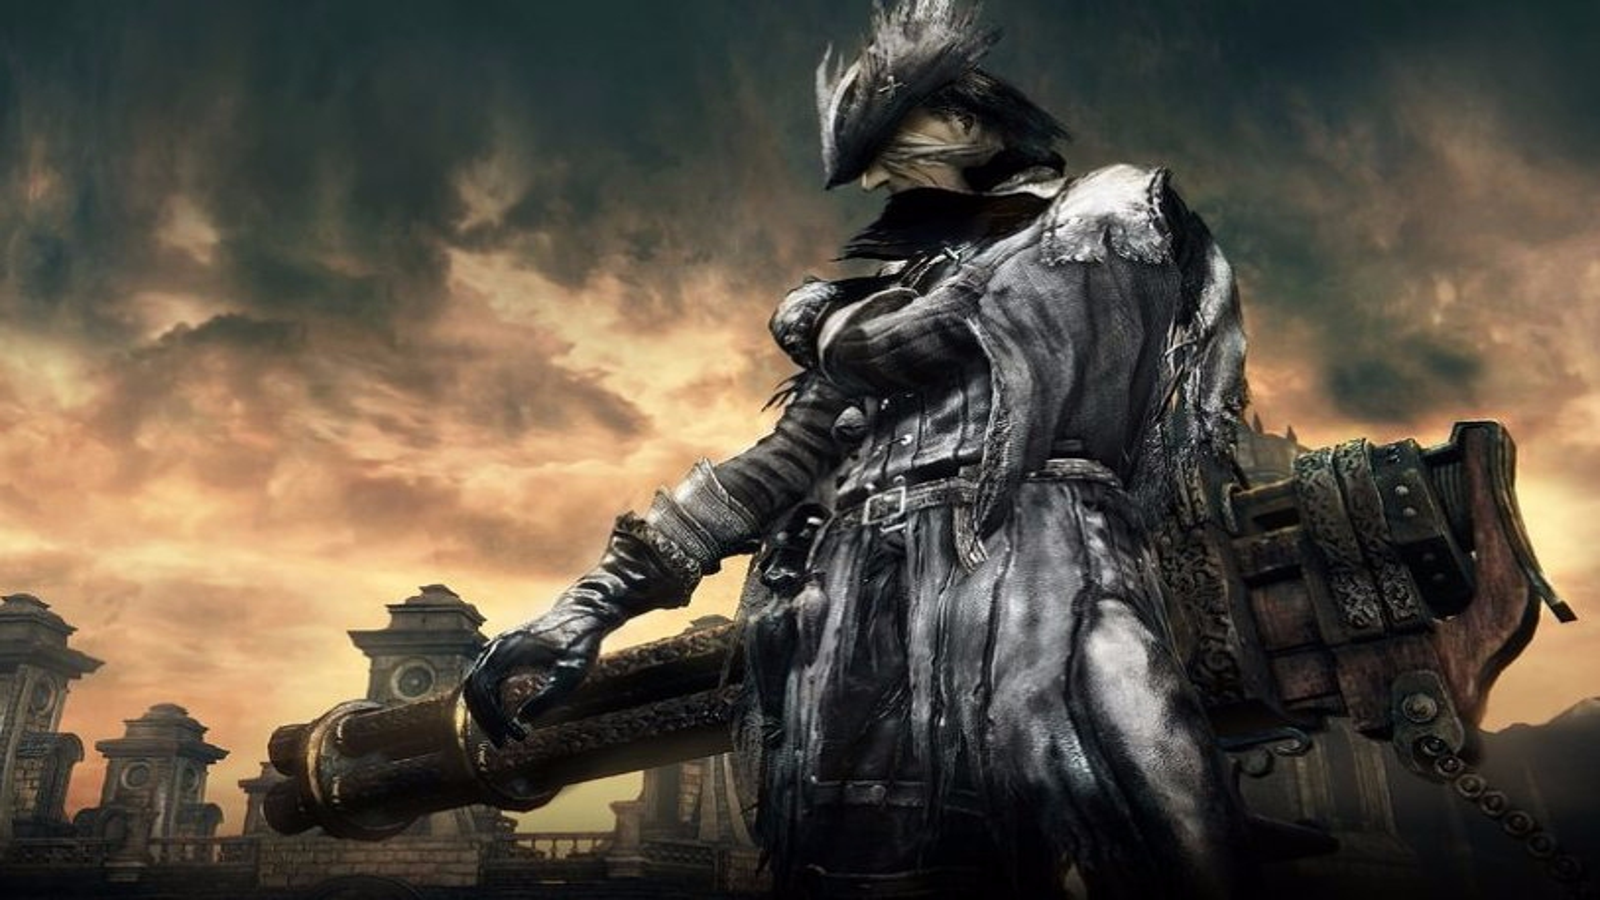 FromSoftware Produces the World's Most Punishing Video Games